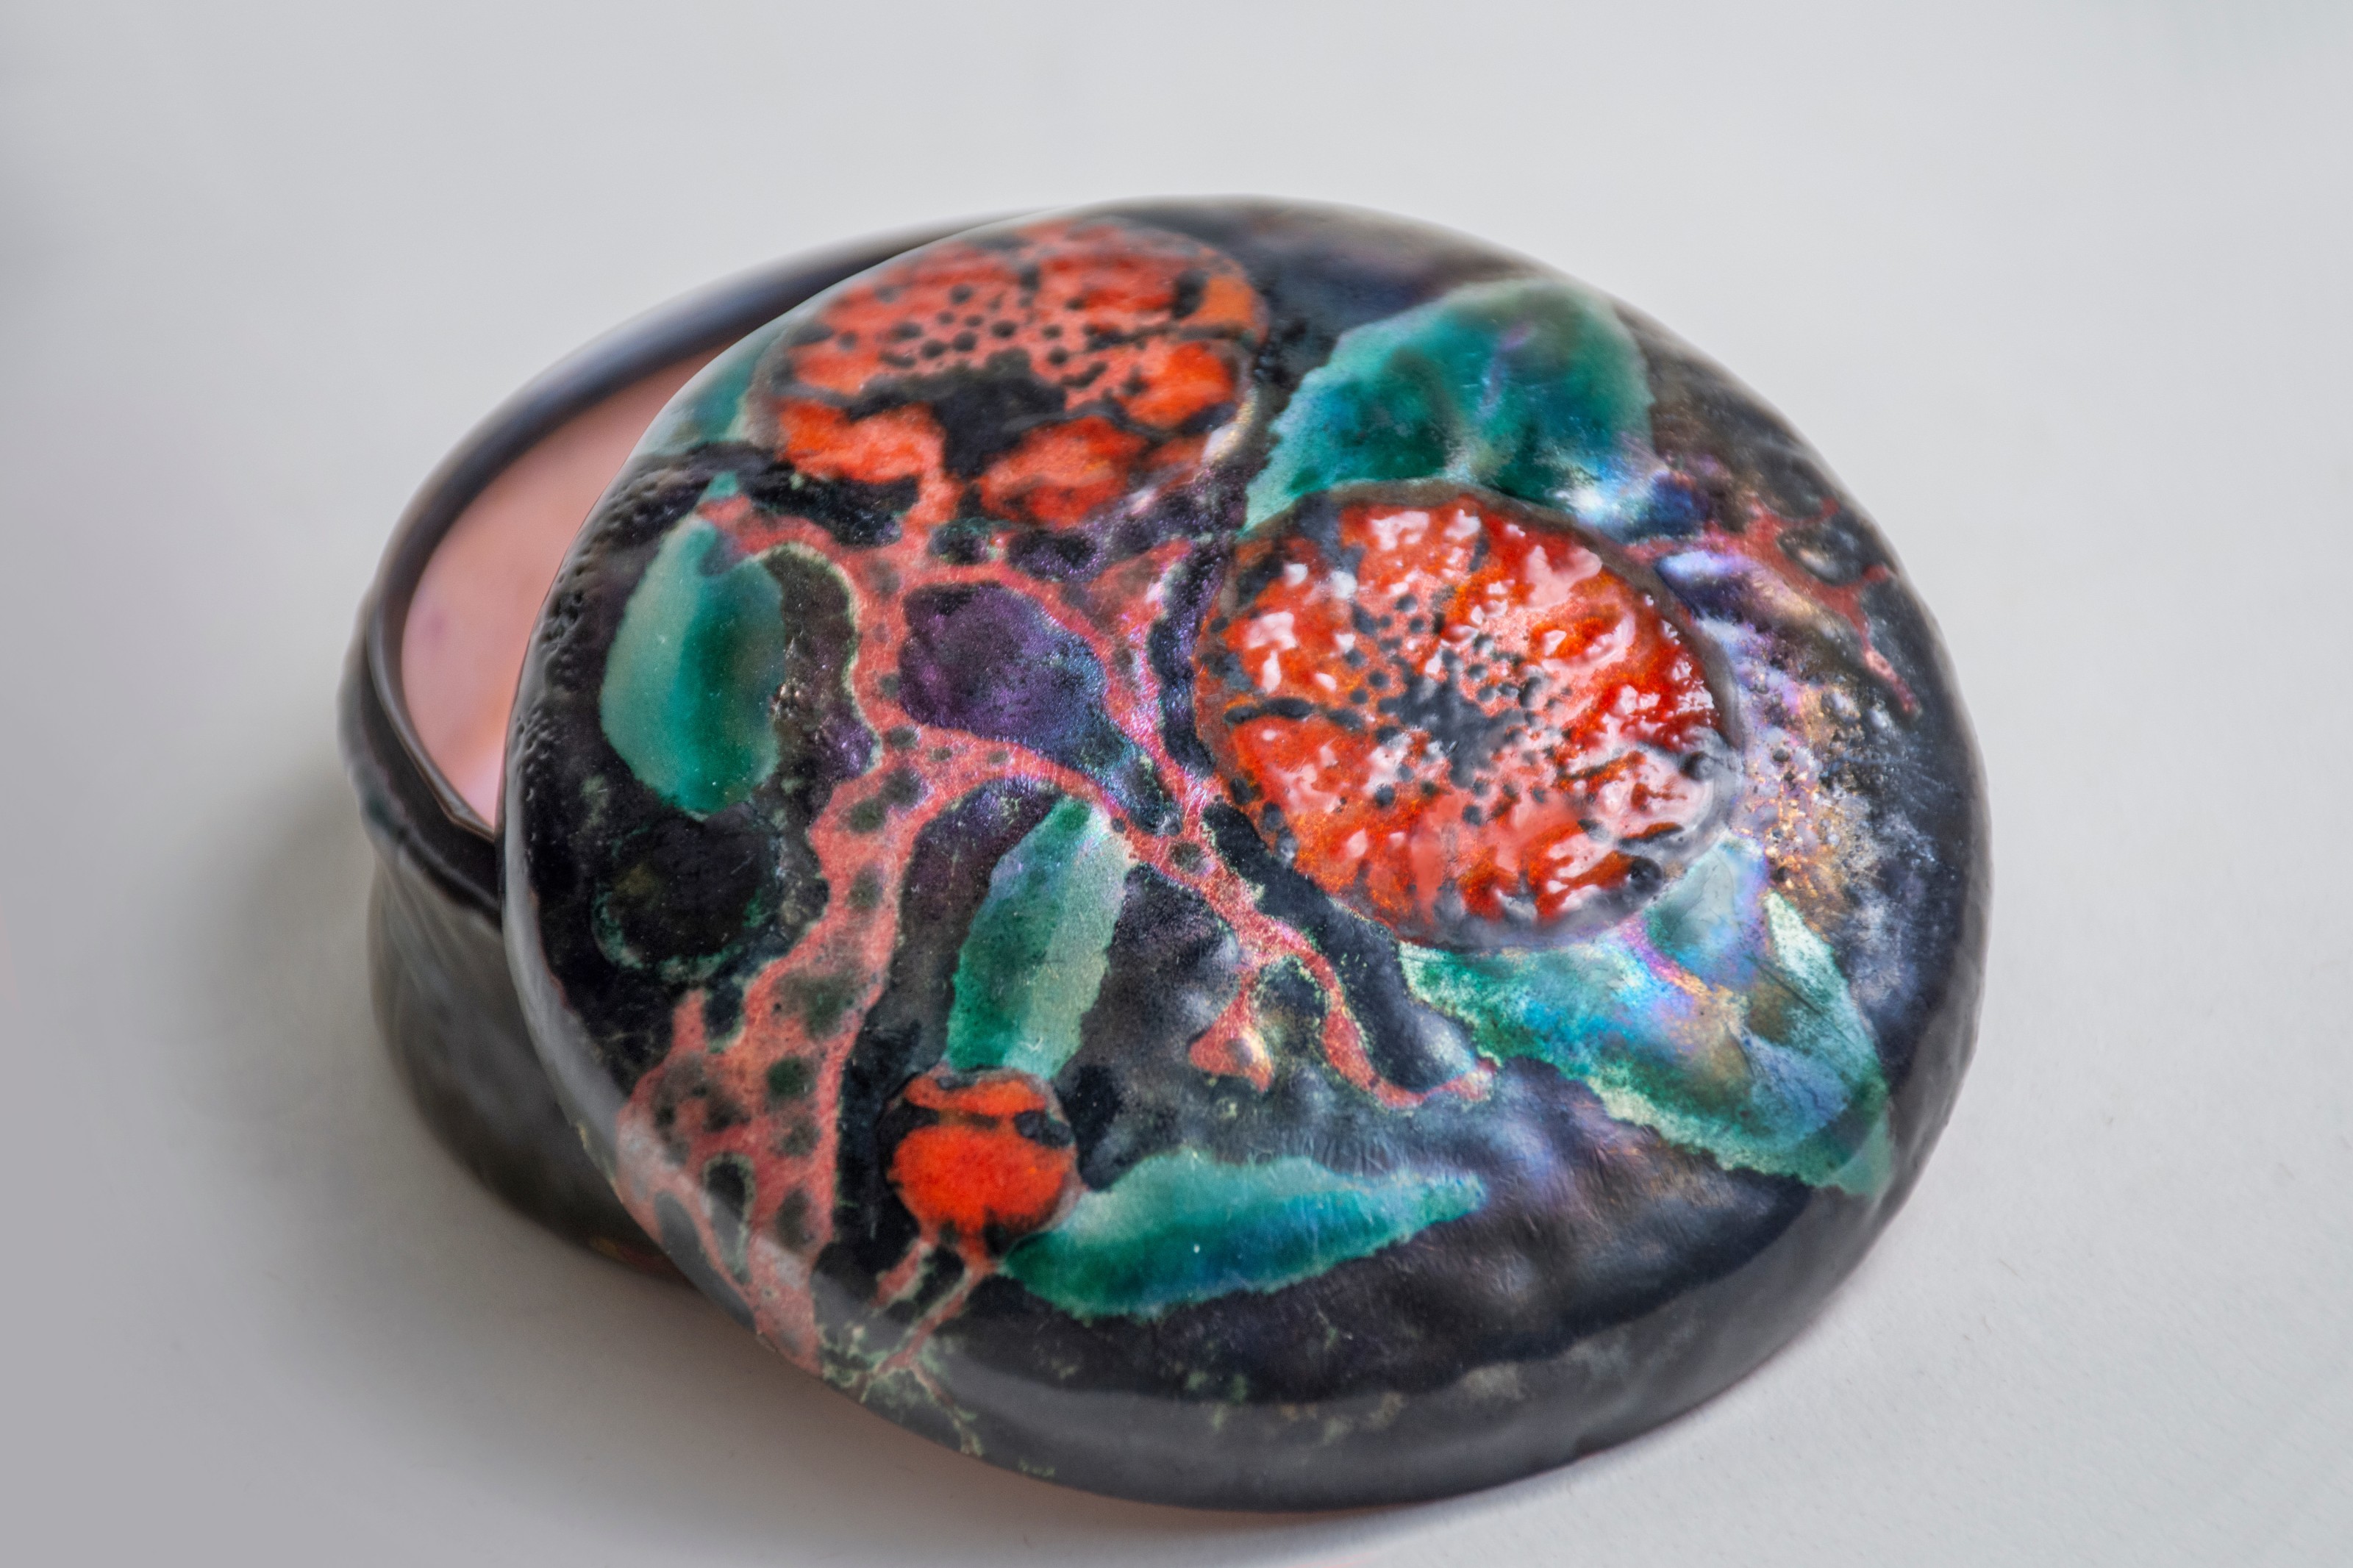 A close up showing the lid of the enameled box showing the iridescent finish of the enamels used in the poppies and their leaves, with raised patterning on the flower centers.